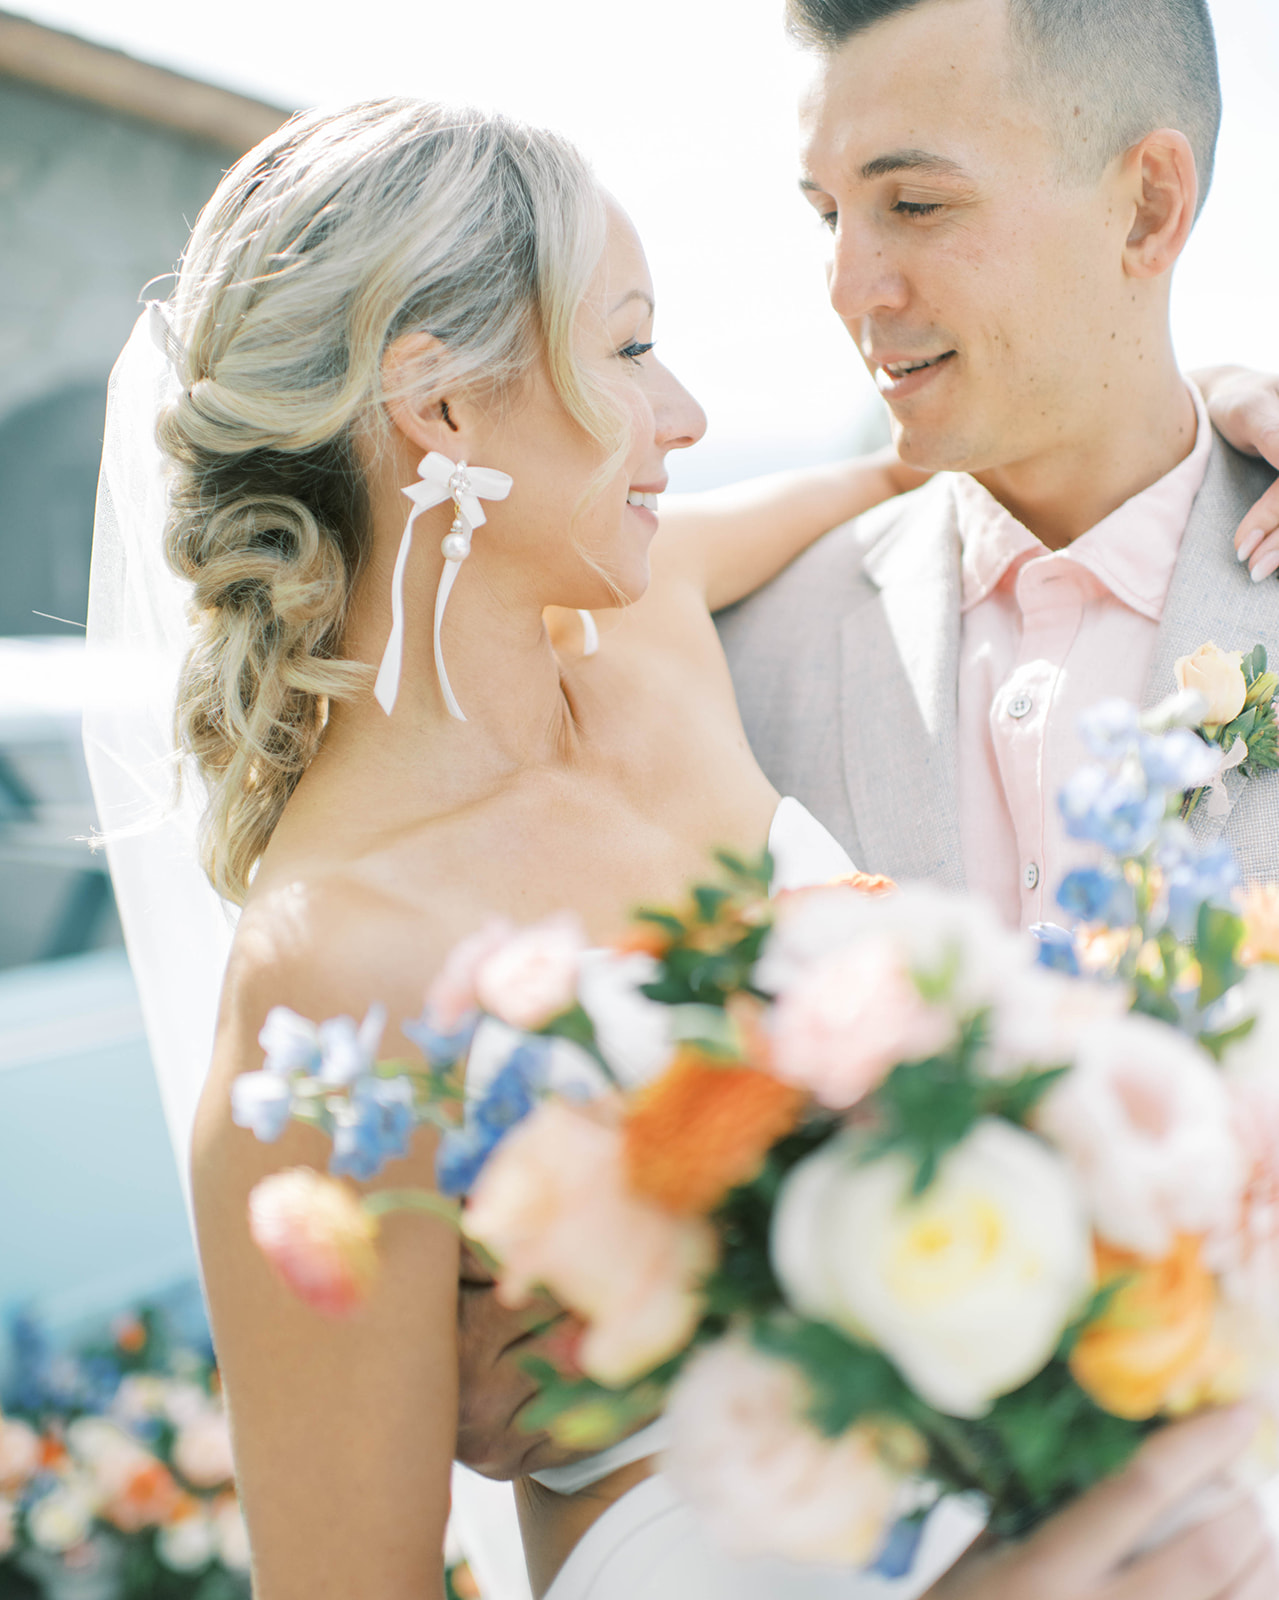 Loose pulled back bridal hairstyle showing off white bow earrings by Lindsay Marie Design in couple's portrait, pink shirt and bow tie worn by the groom to compliment the summer season, lush summery floral inspiration